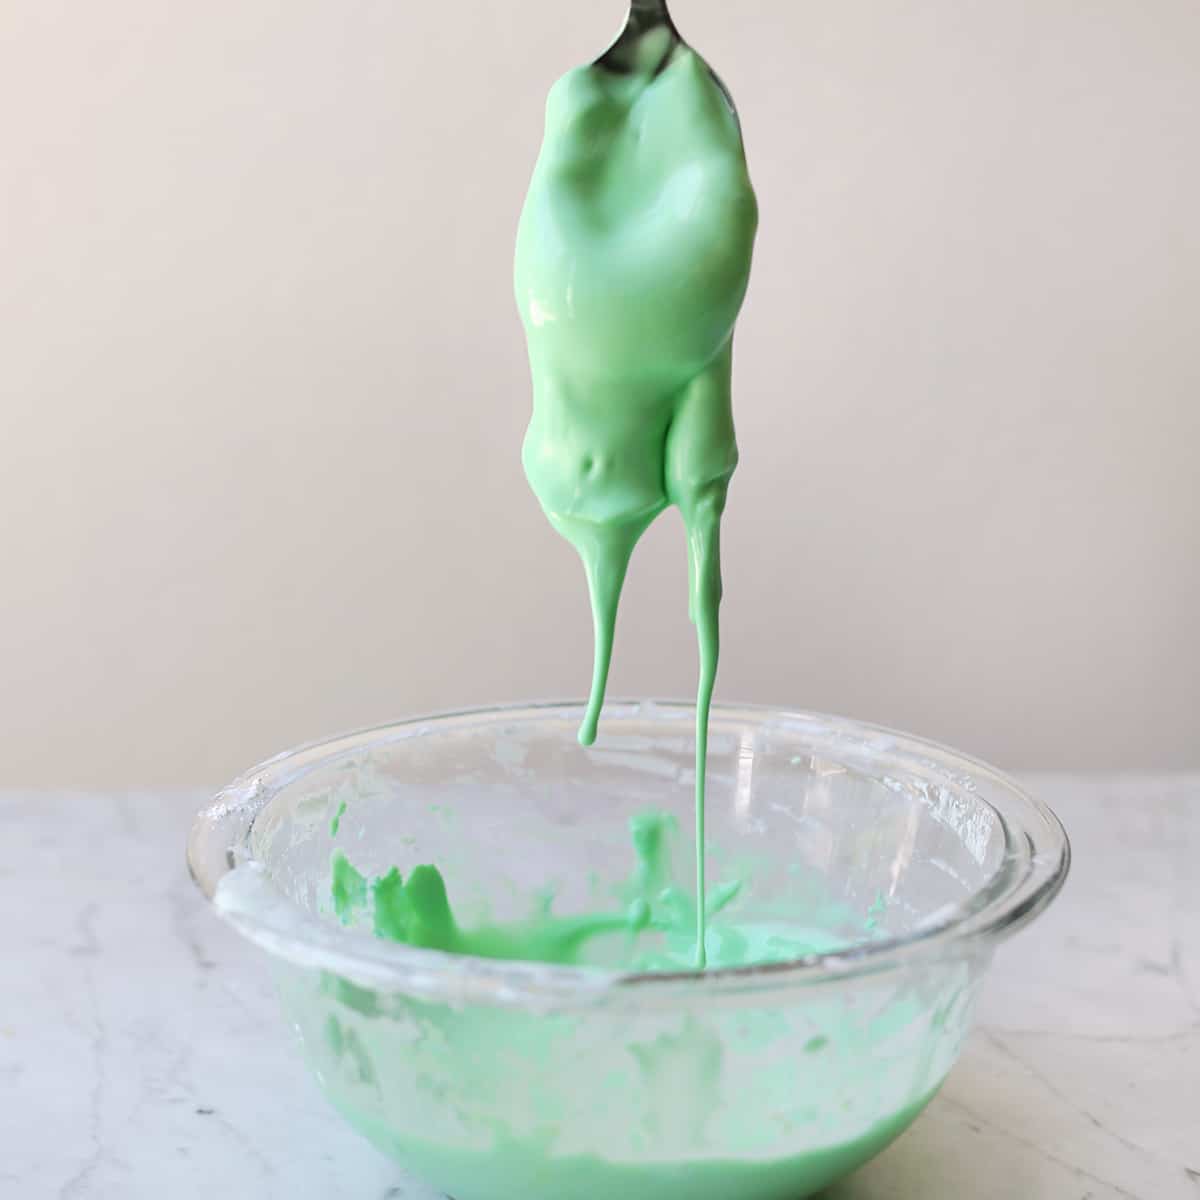 Oobleck dripping into a bowl. 